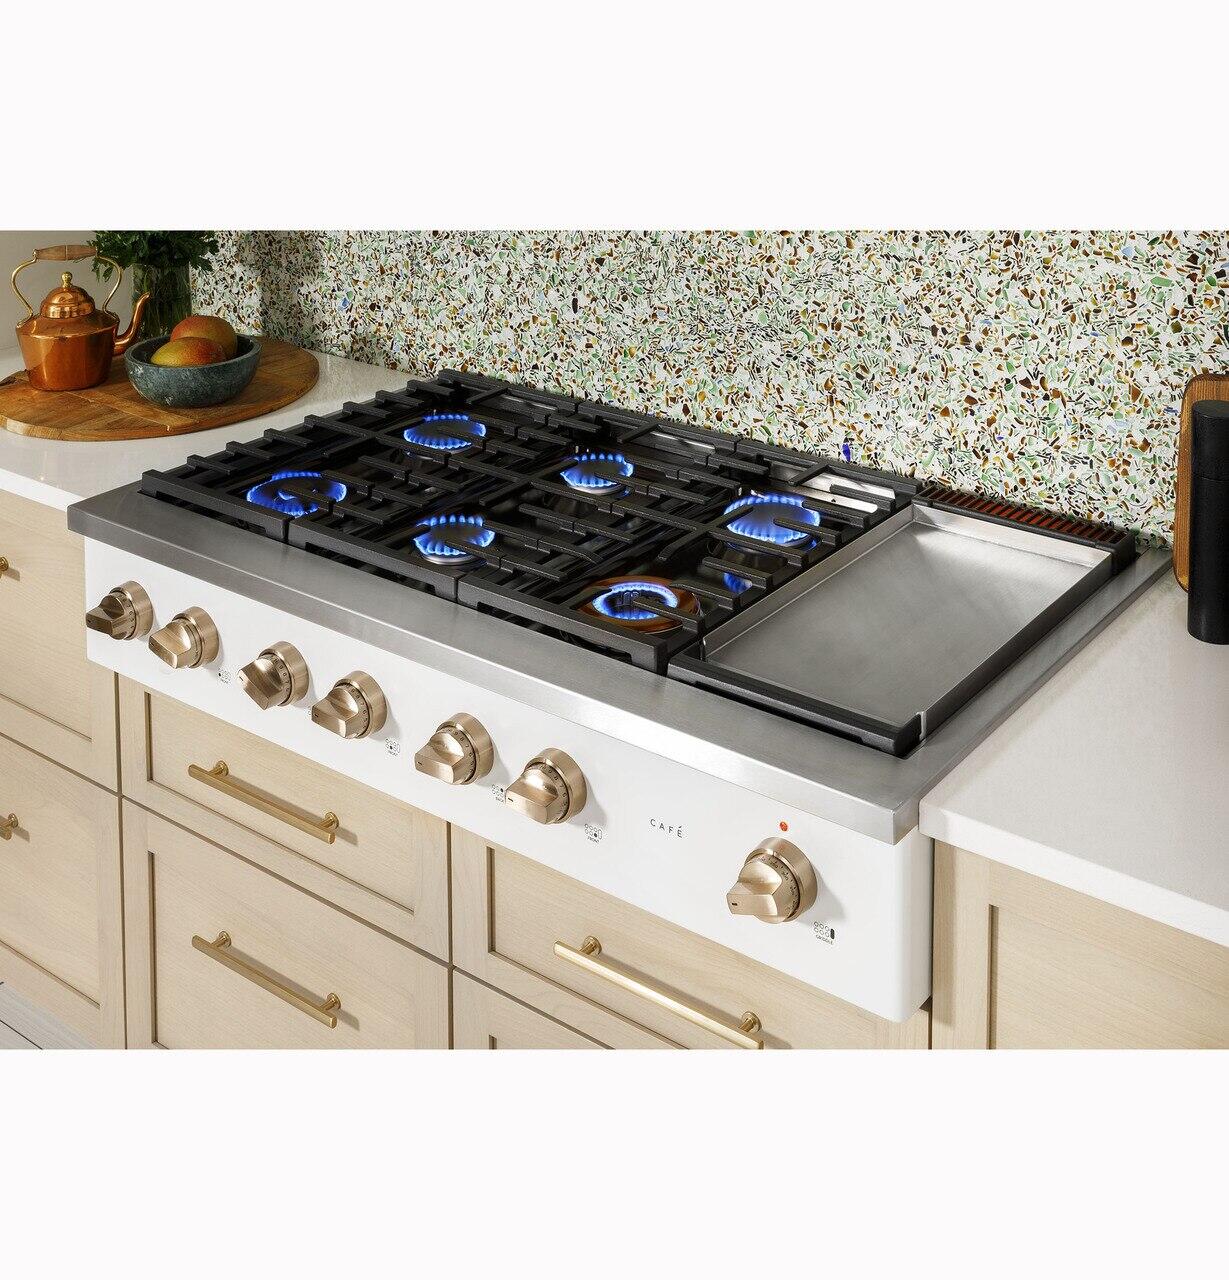 Cafe CGU486P2TS1 Café&#8482; 48" Commercial-Style Gas Rangetop With 6 Burners And Integrated Griddle (Natural Gas)